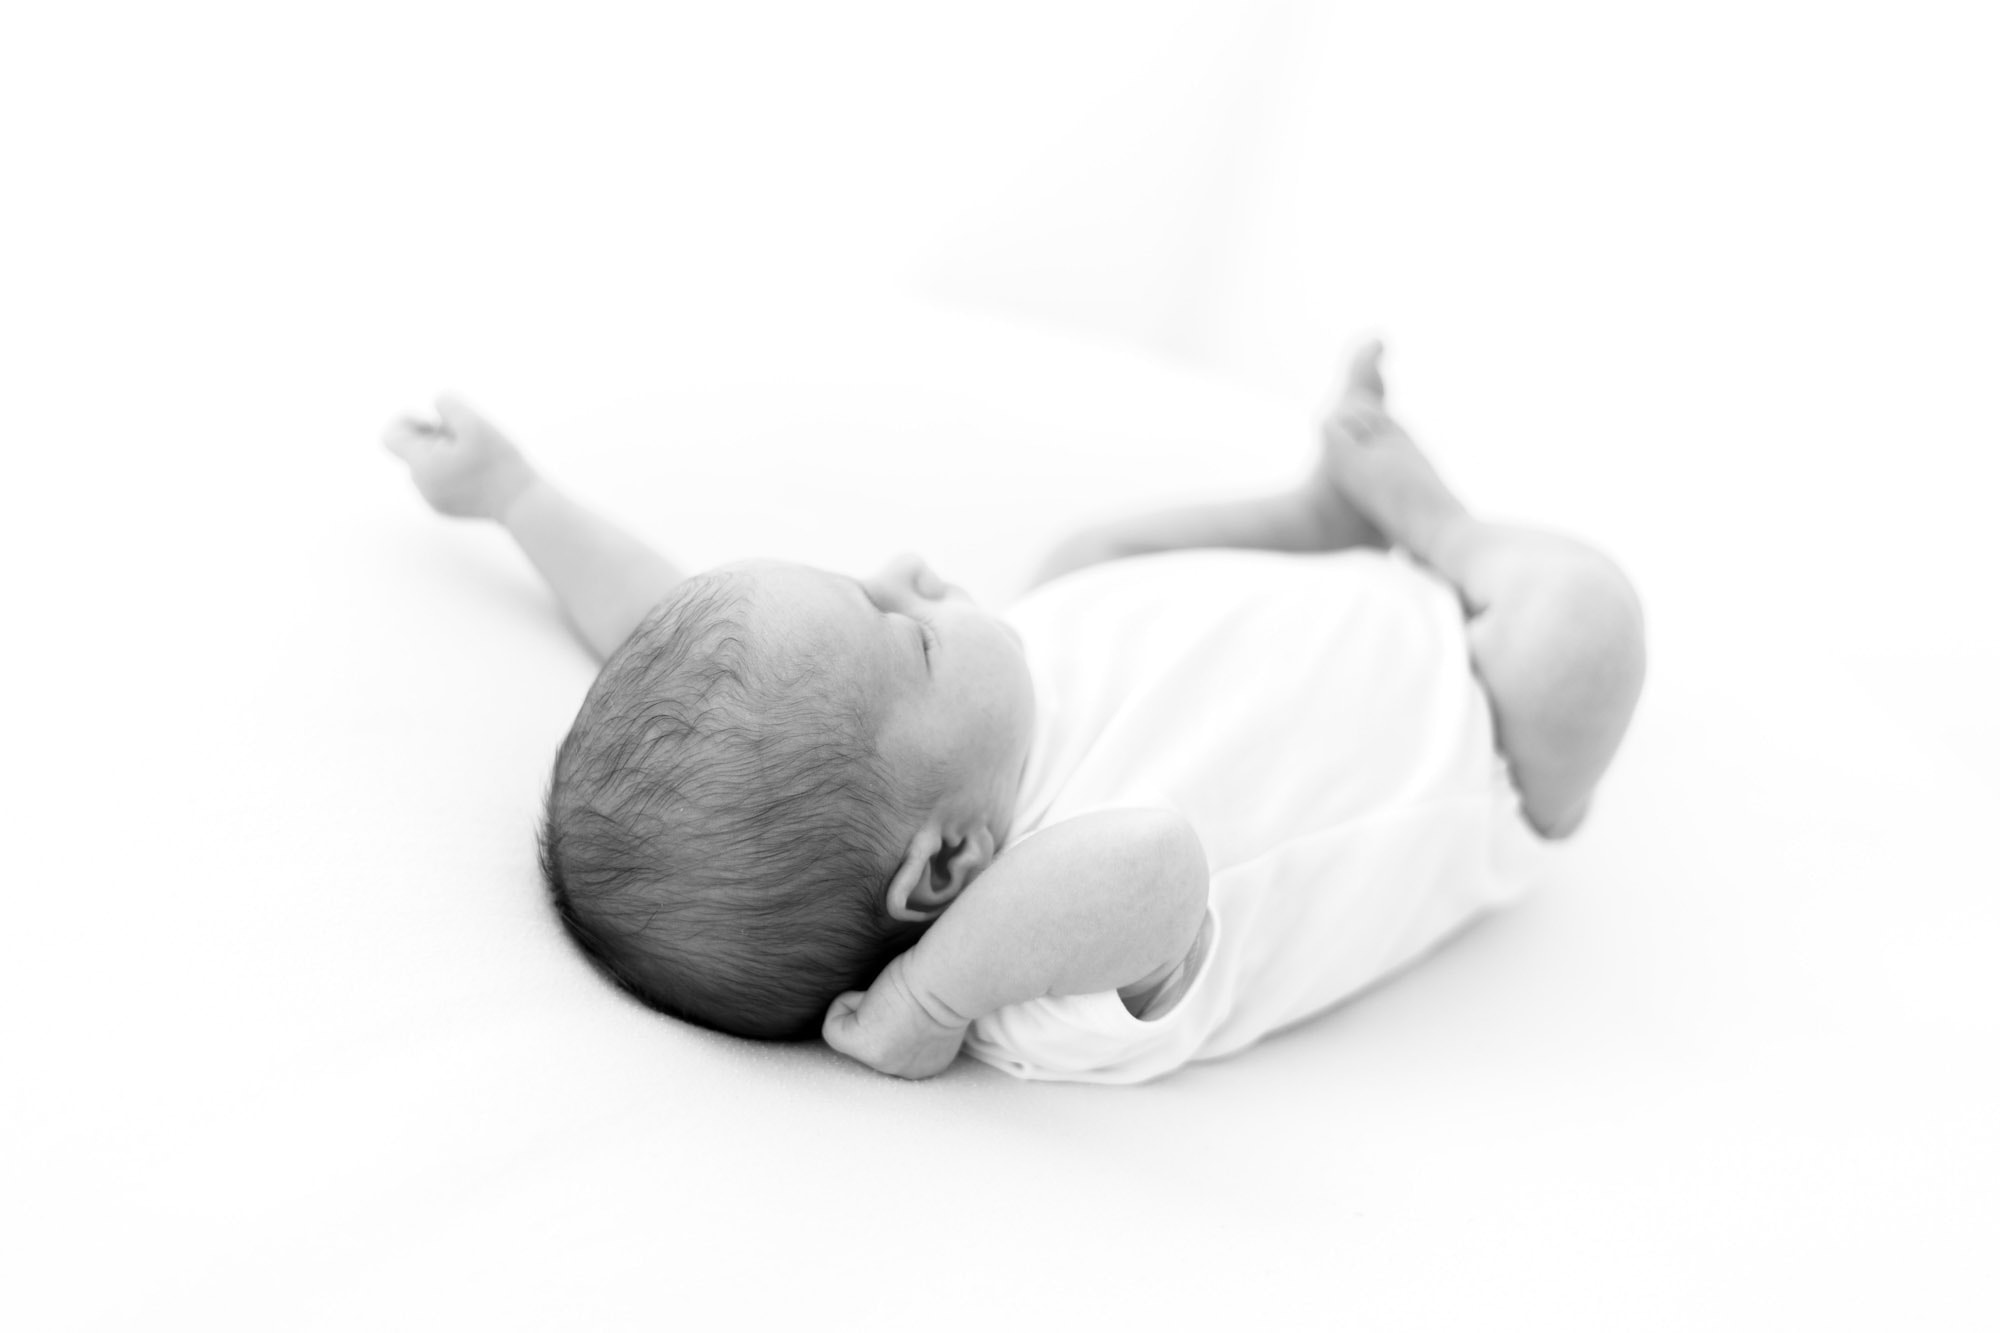 newborn photographer norwich captures baby stretching on white background